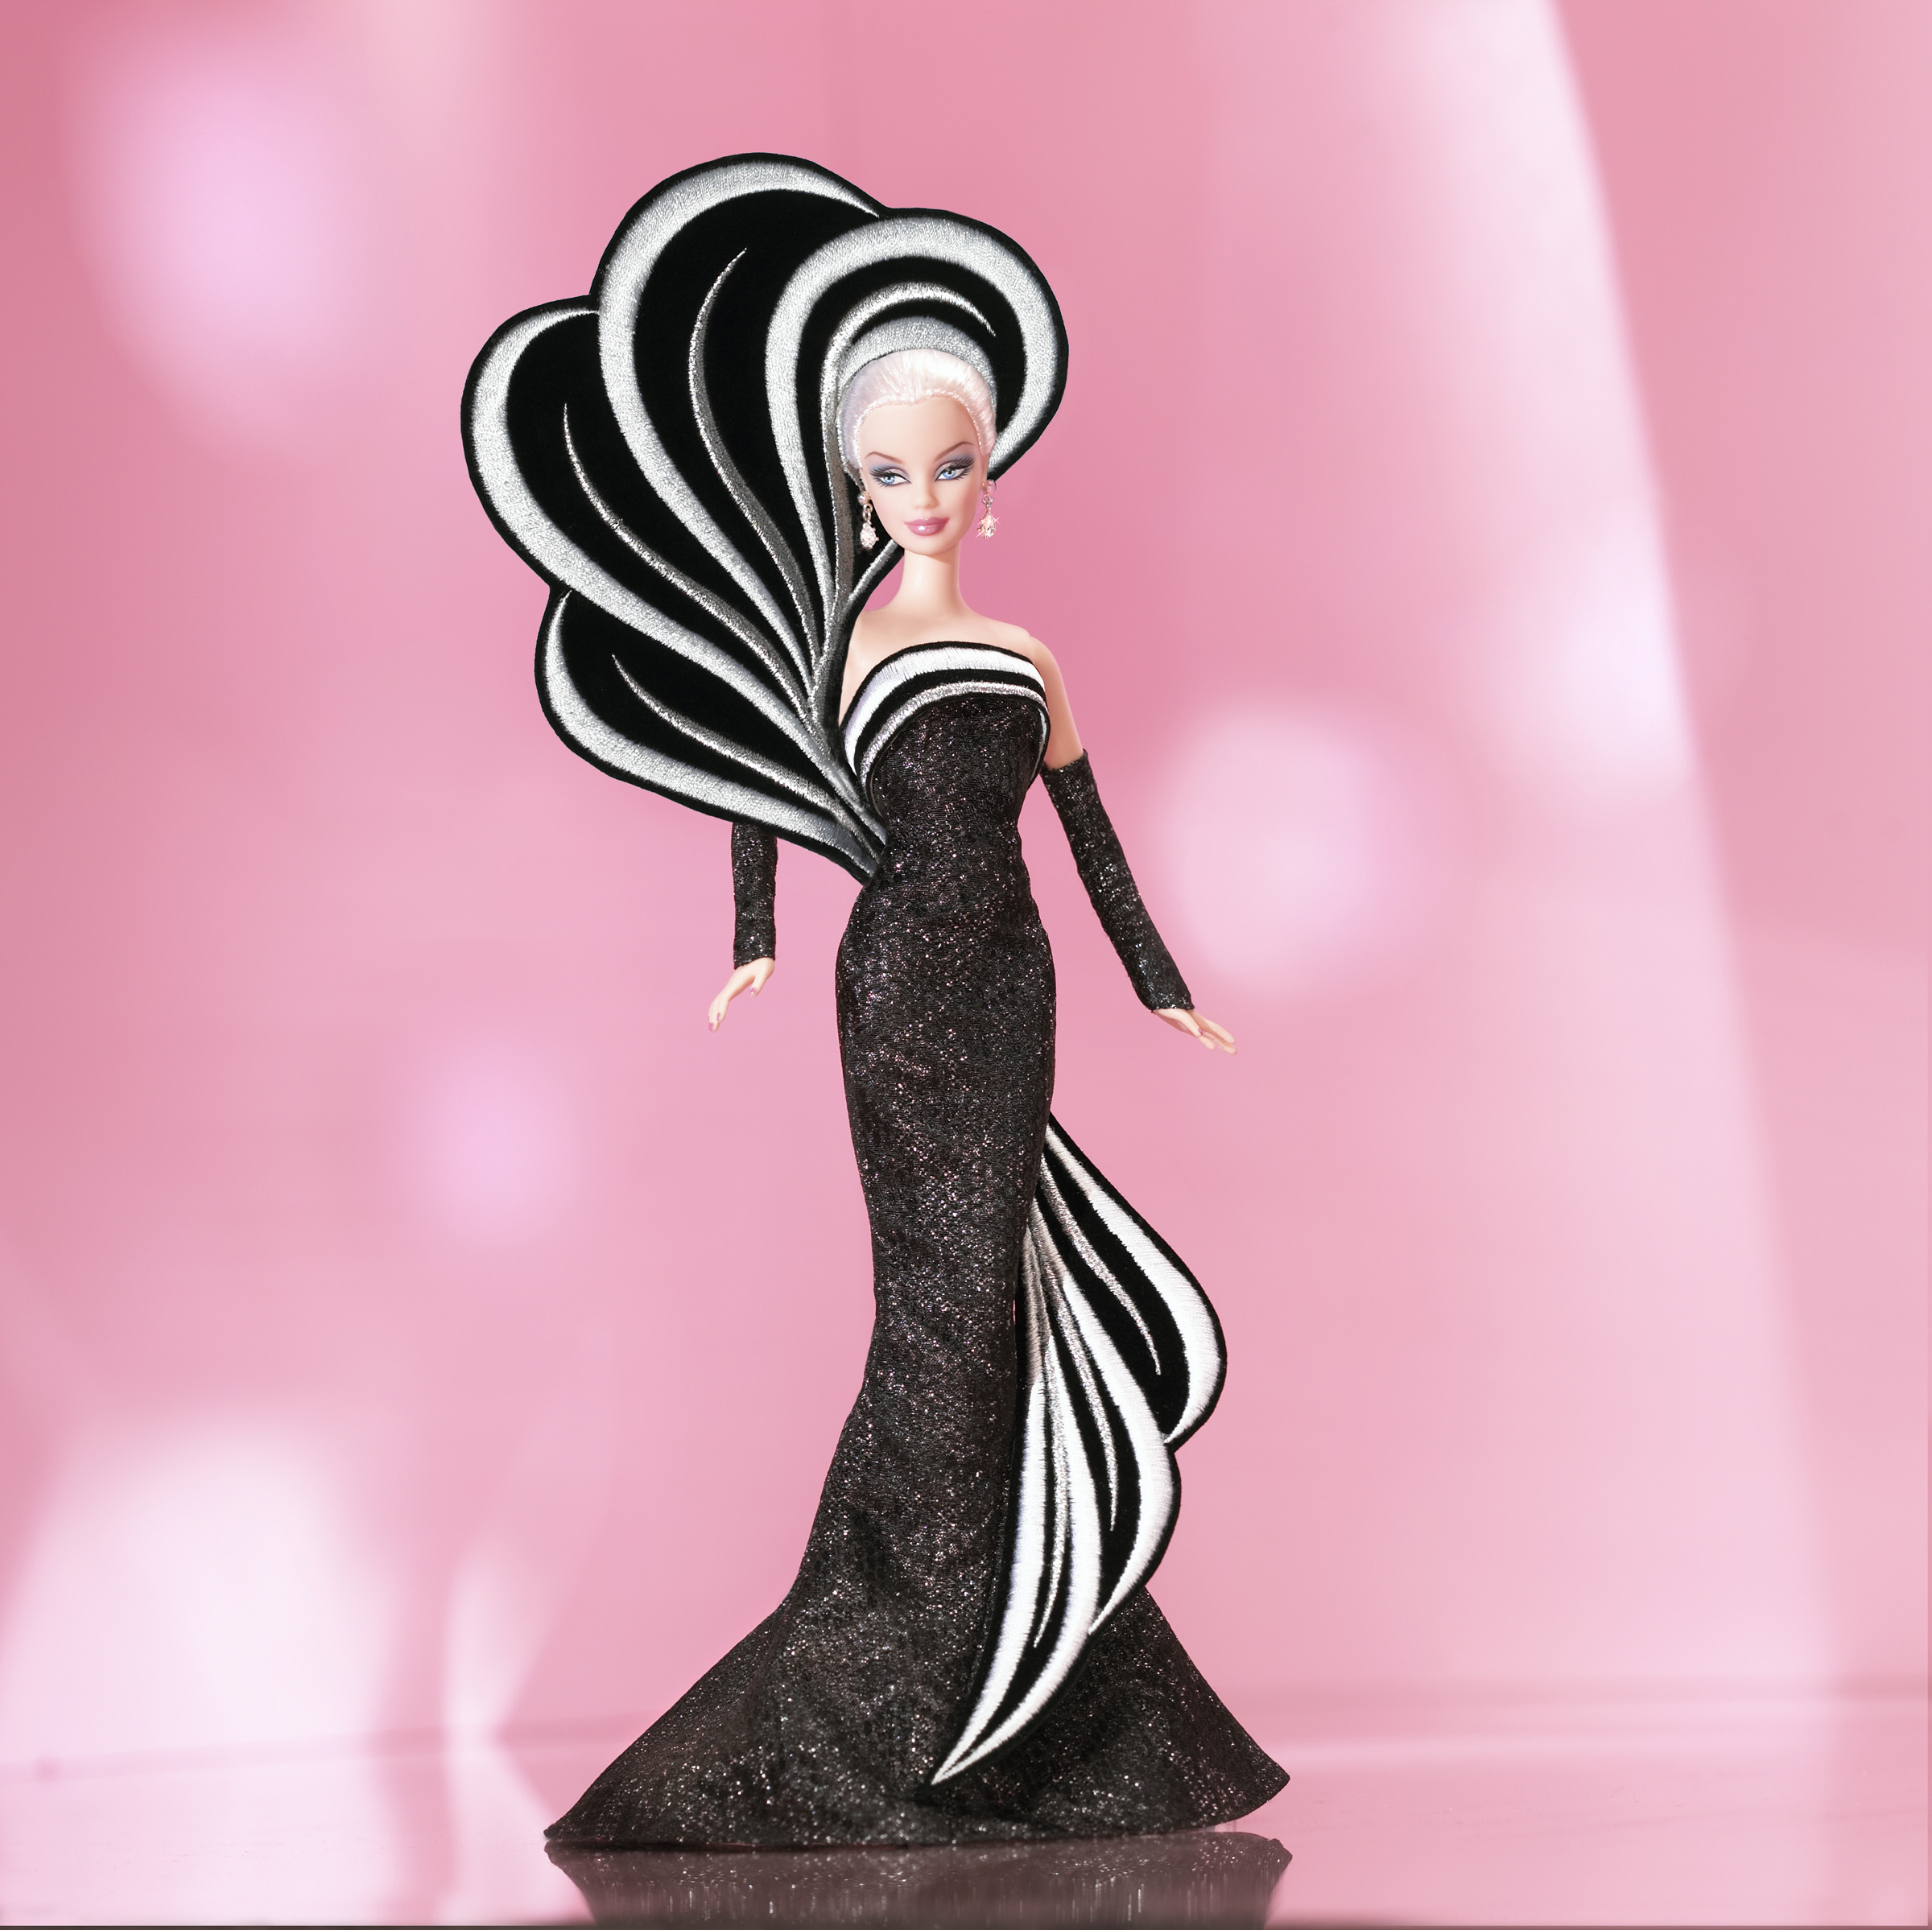 The 45th Anniversary Barbie Doll by Bob Mackie, released in 2004.